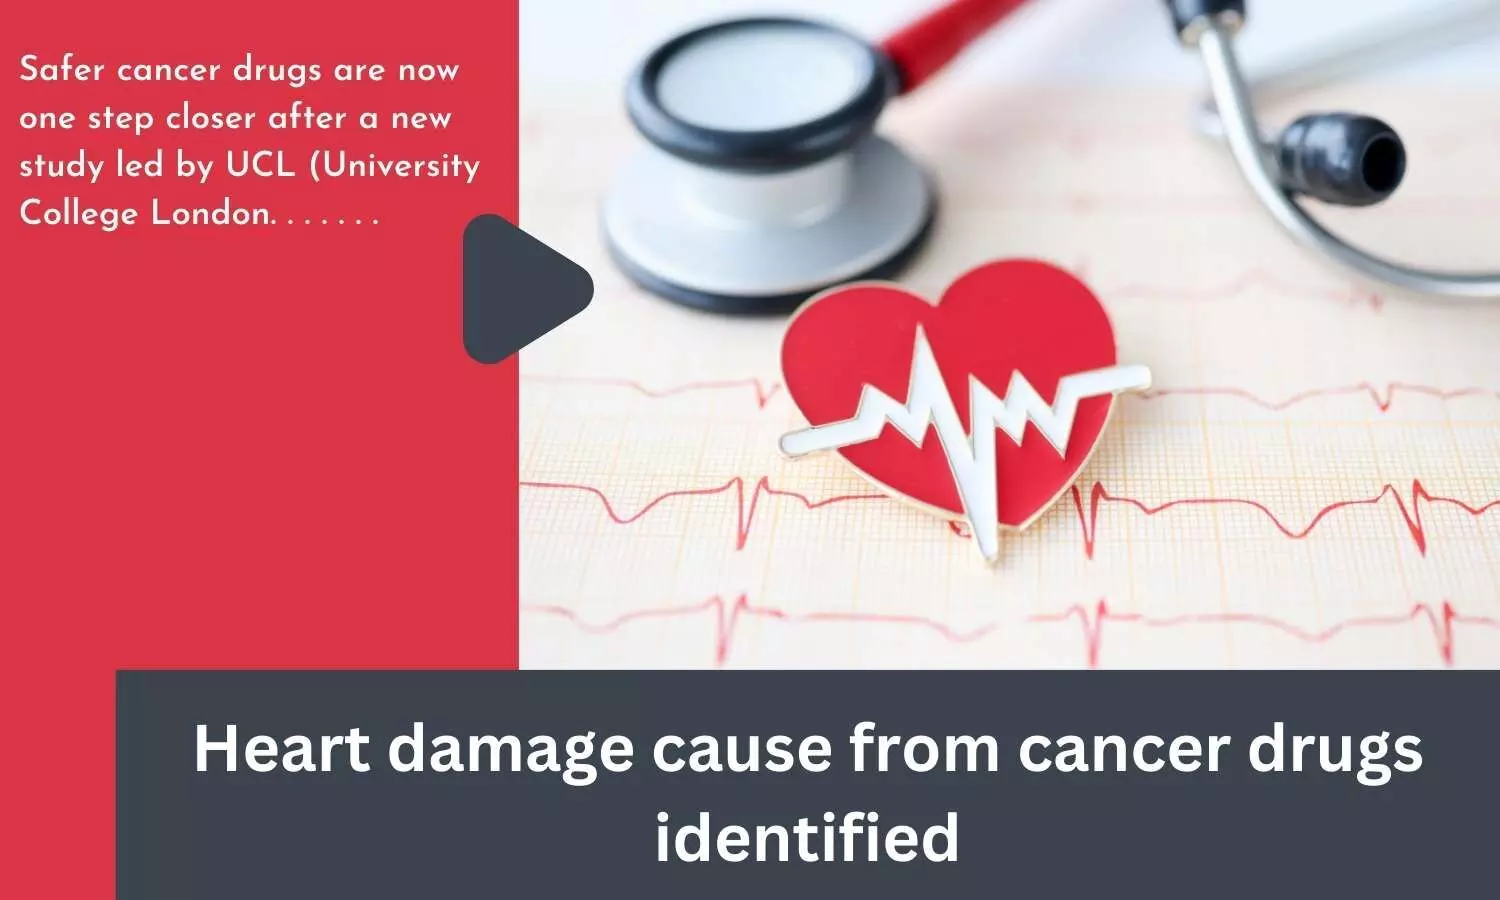 Heart damage cause from cancer drugs identified